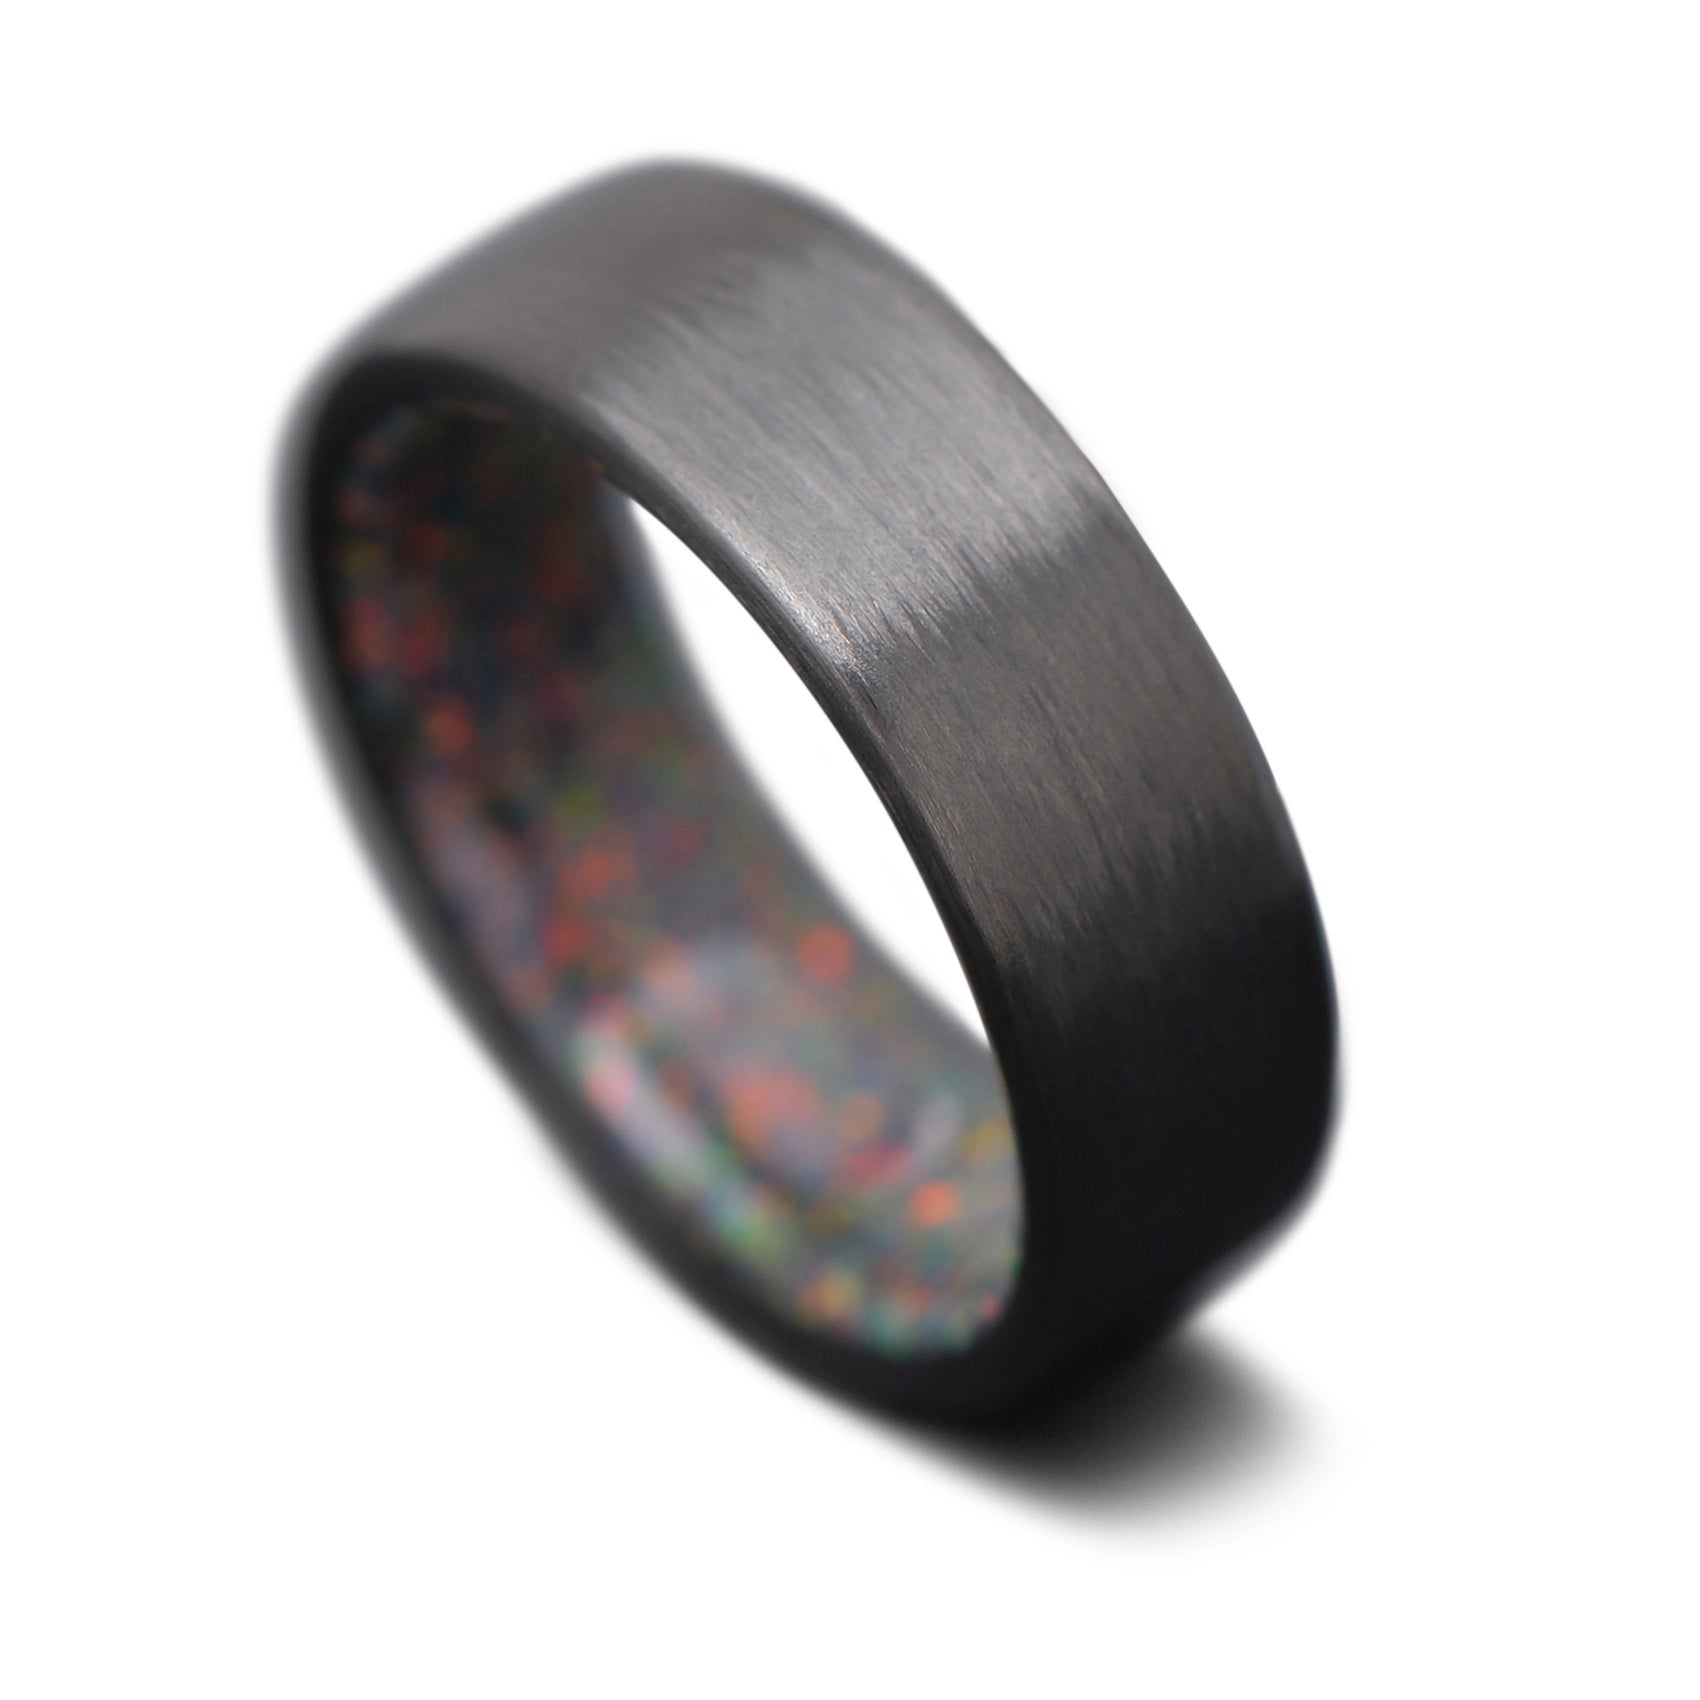 CarbonUni Core Ring with Black Fire Opal inner sleeve, 7mm -THE QUANTUM